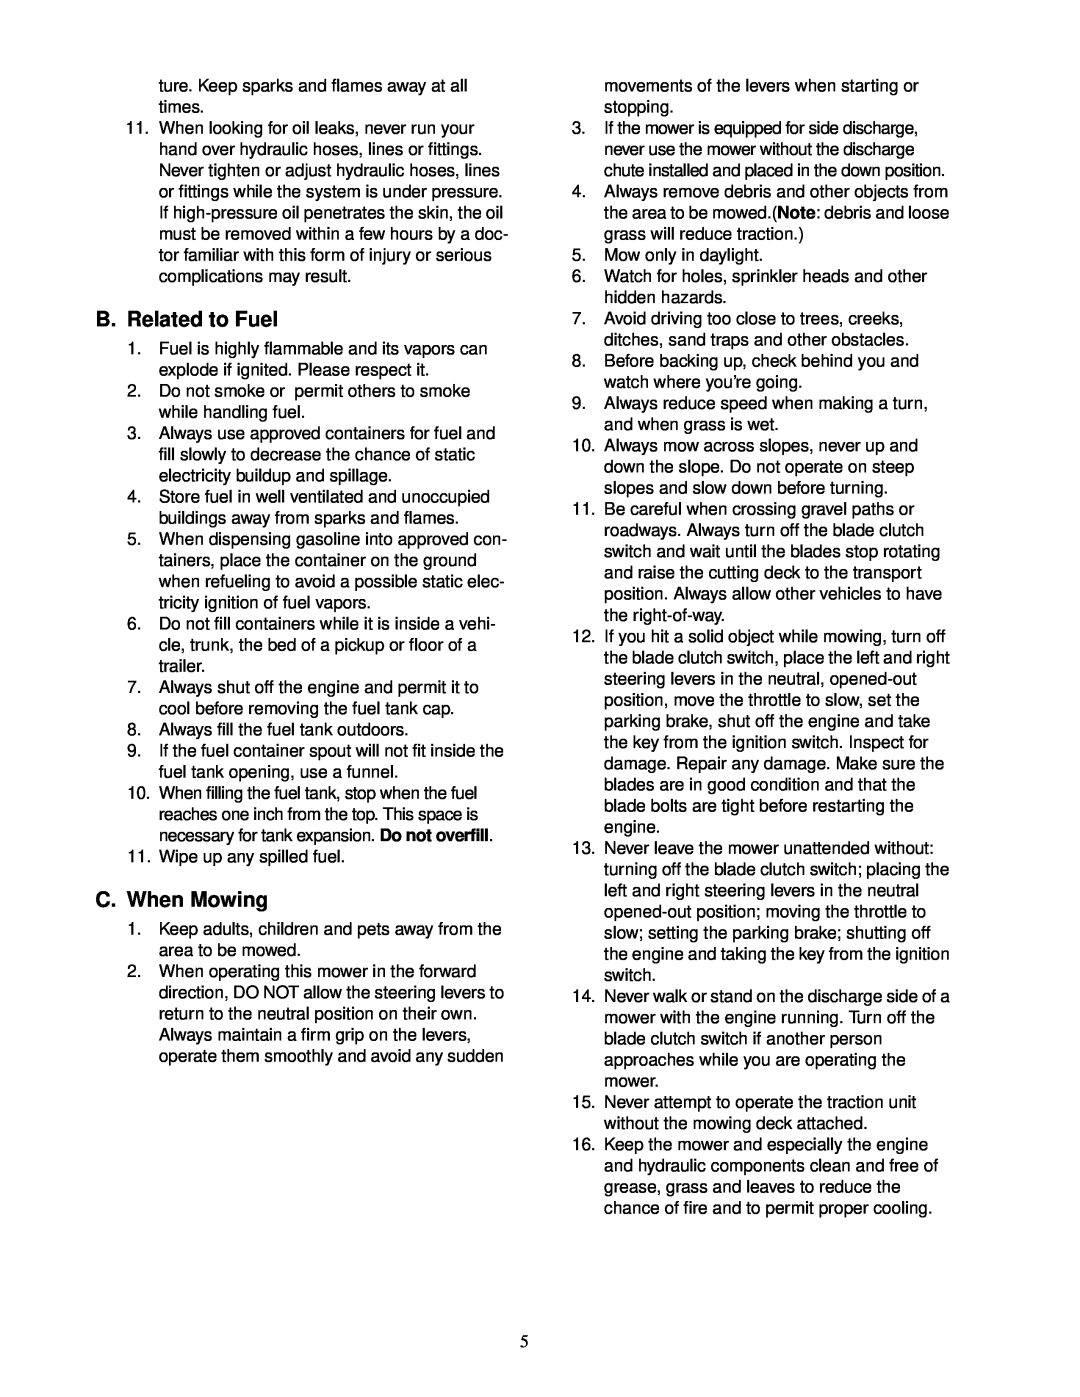 Cub Cadet 60-inch & 72-inch Fabricated Deck service manual B. Related to Fuel, C. When Mowing 